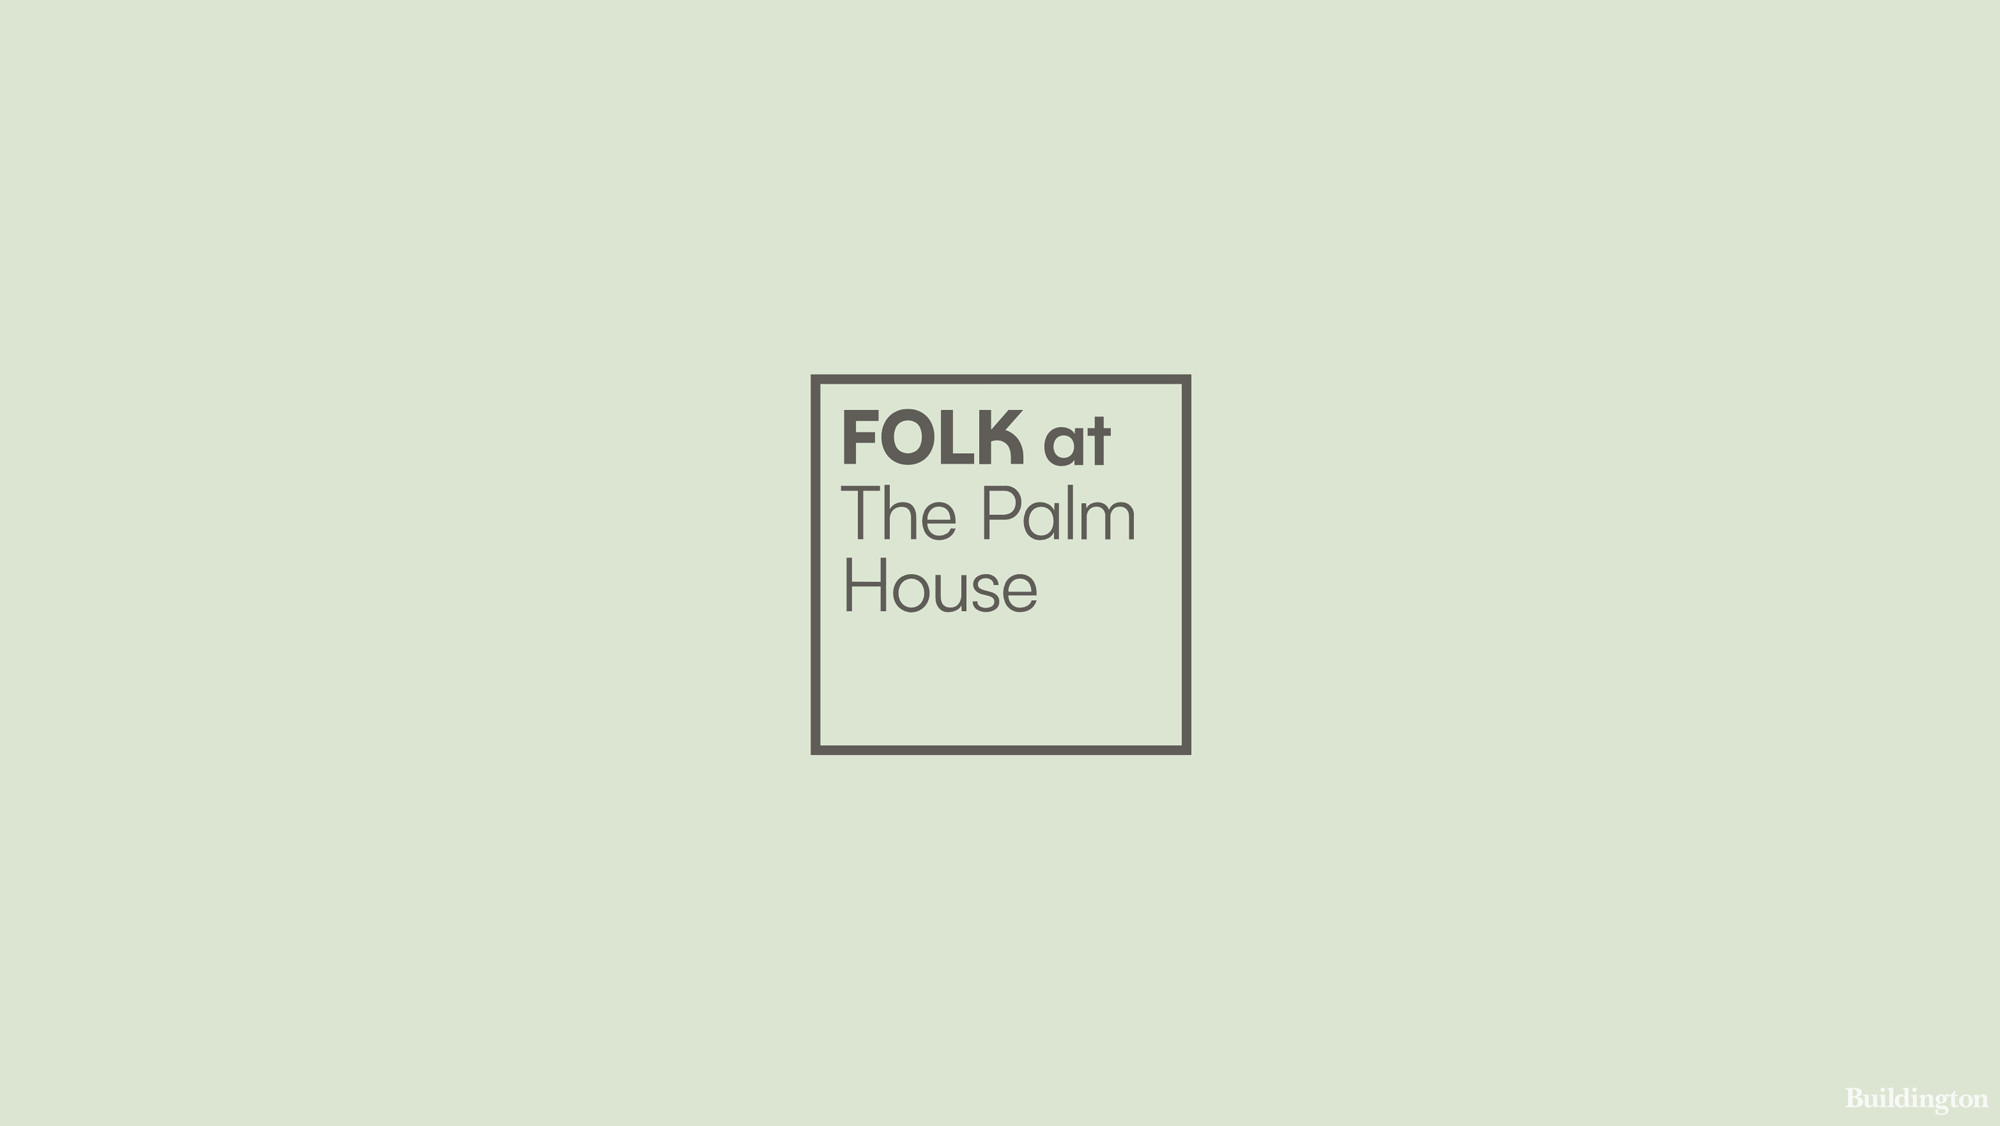 Folk at The Palm House co-living building logo